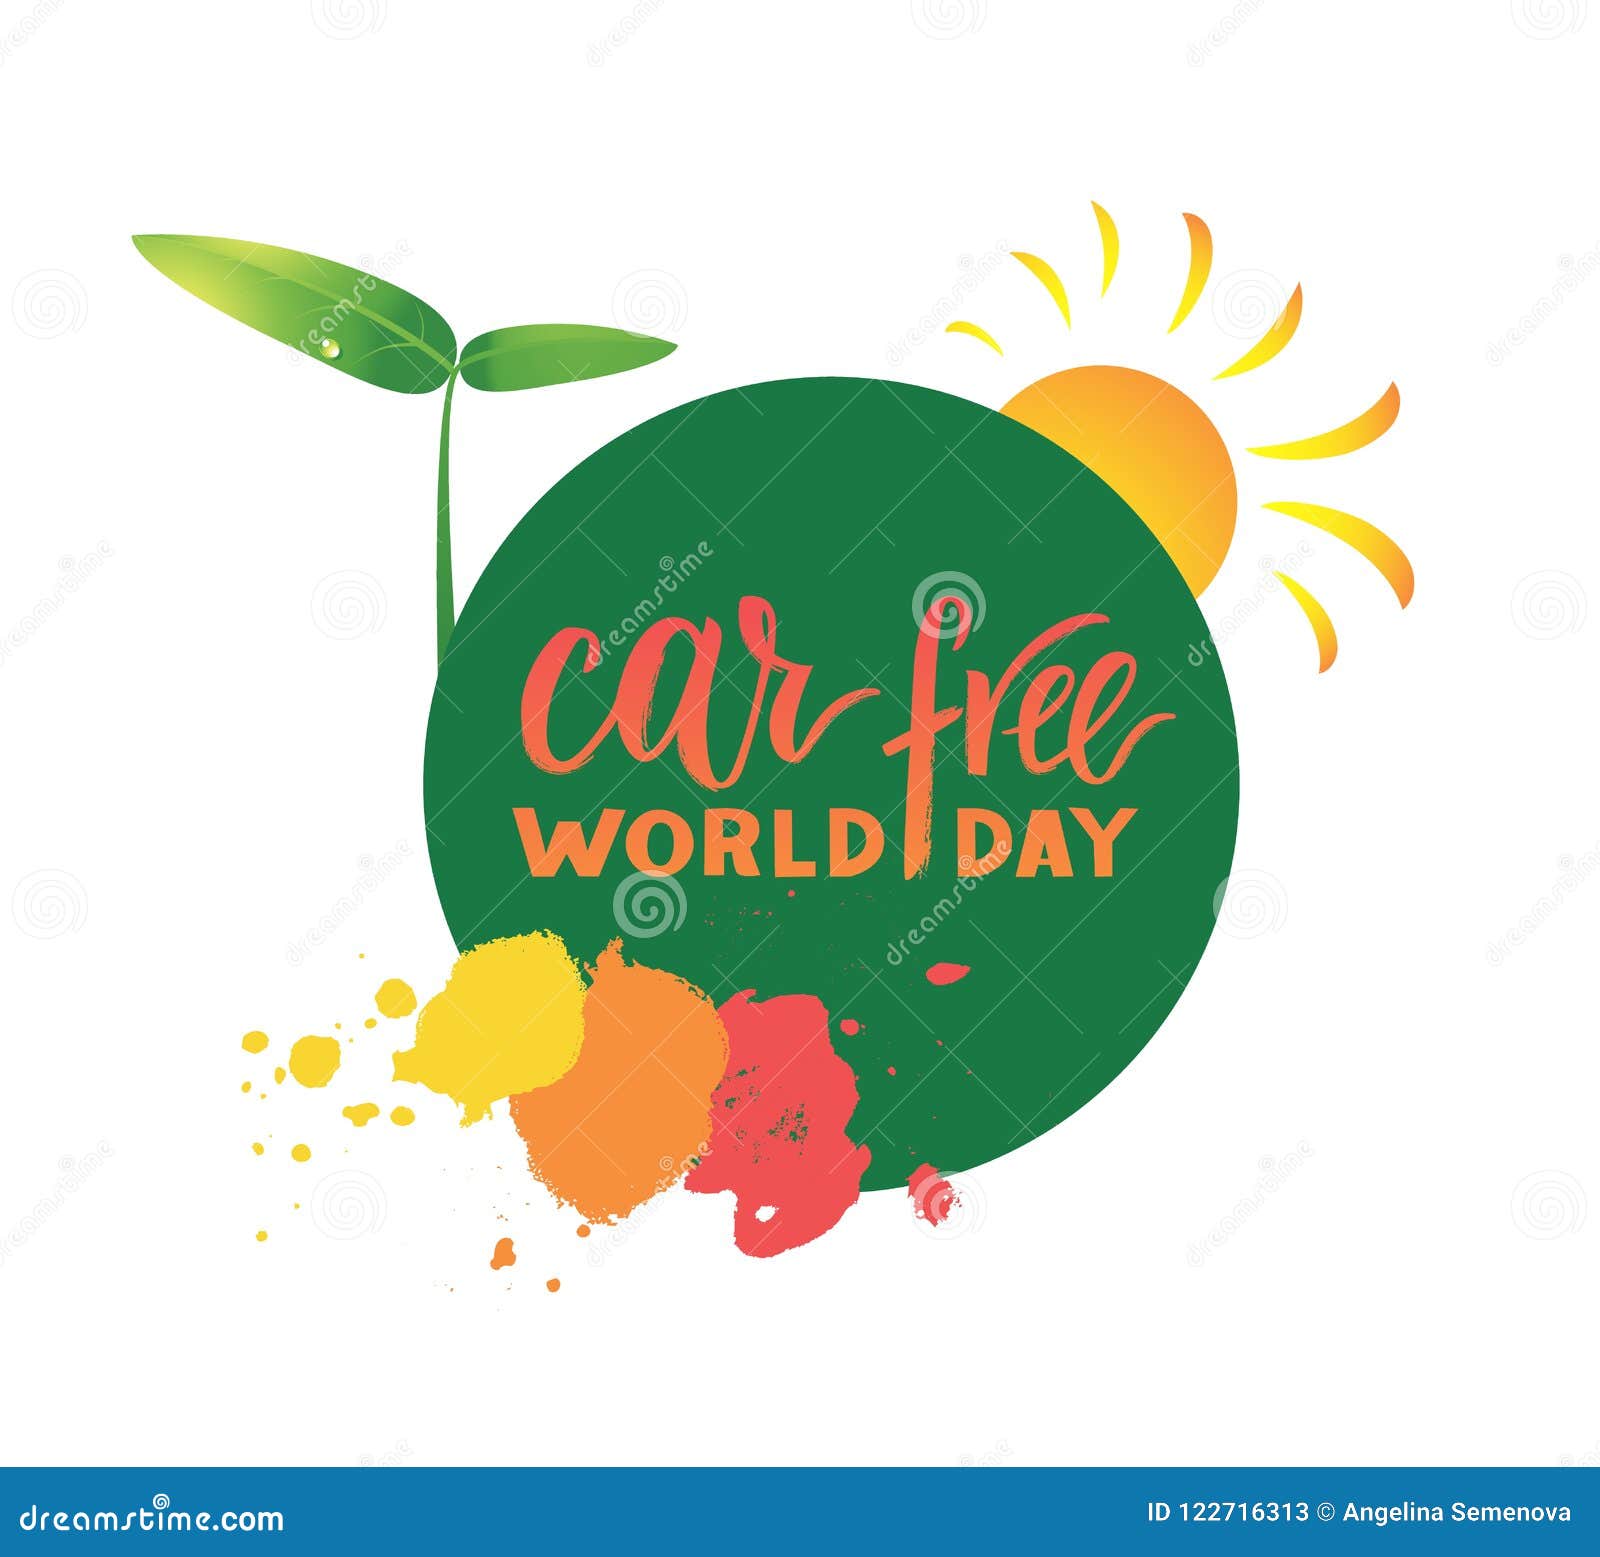 Composition of hand drawn lettering World Car Free Day with elements. Composition of hand drawn lettering World Car Free Day with decorative elements. Modern calligraphy for greeting card, print, poster. Support social movement, encourage people to walk, cycle.